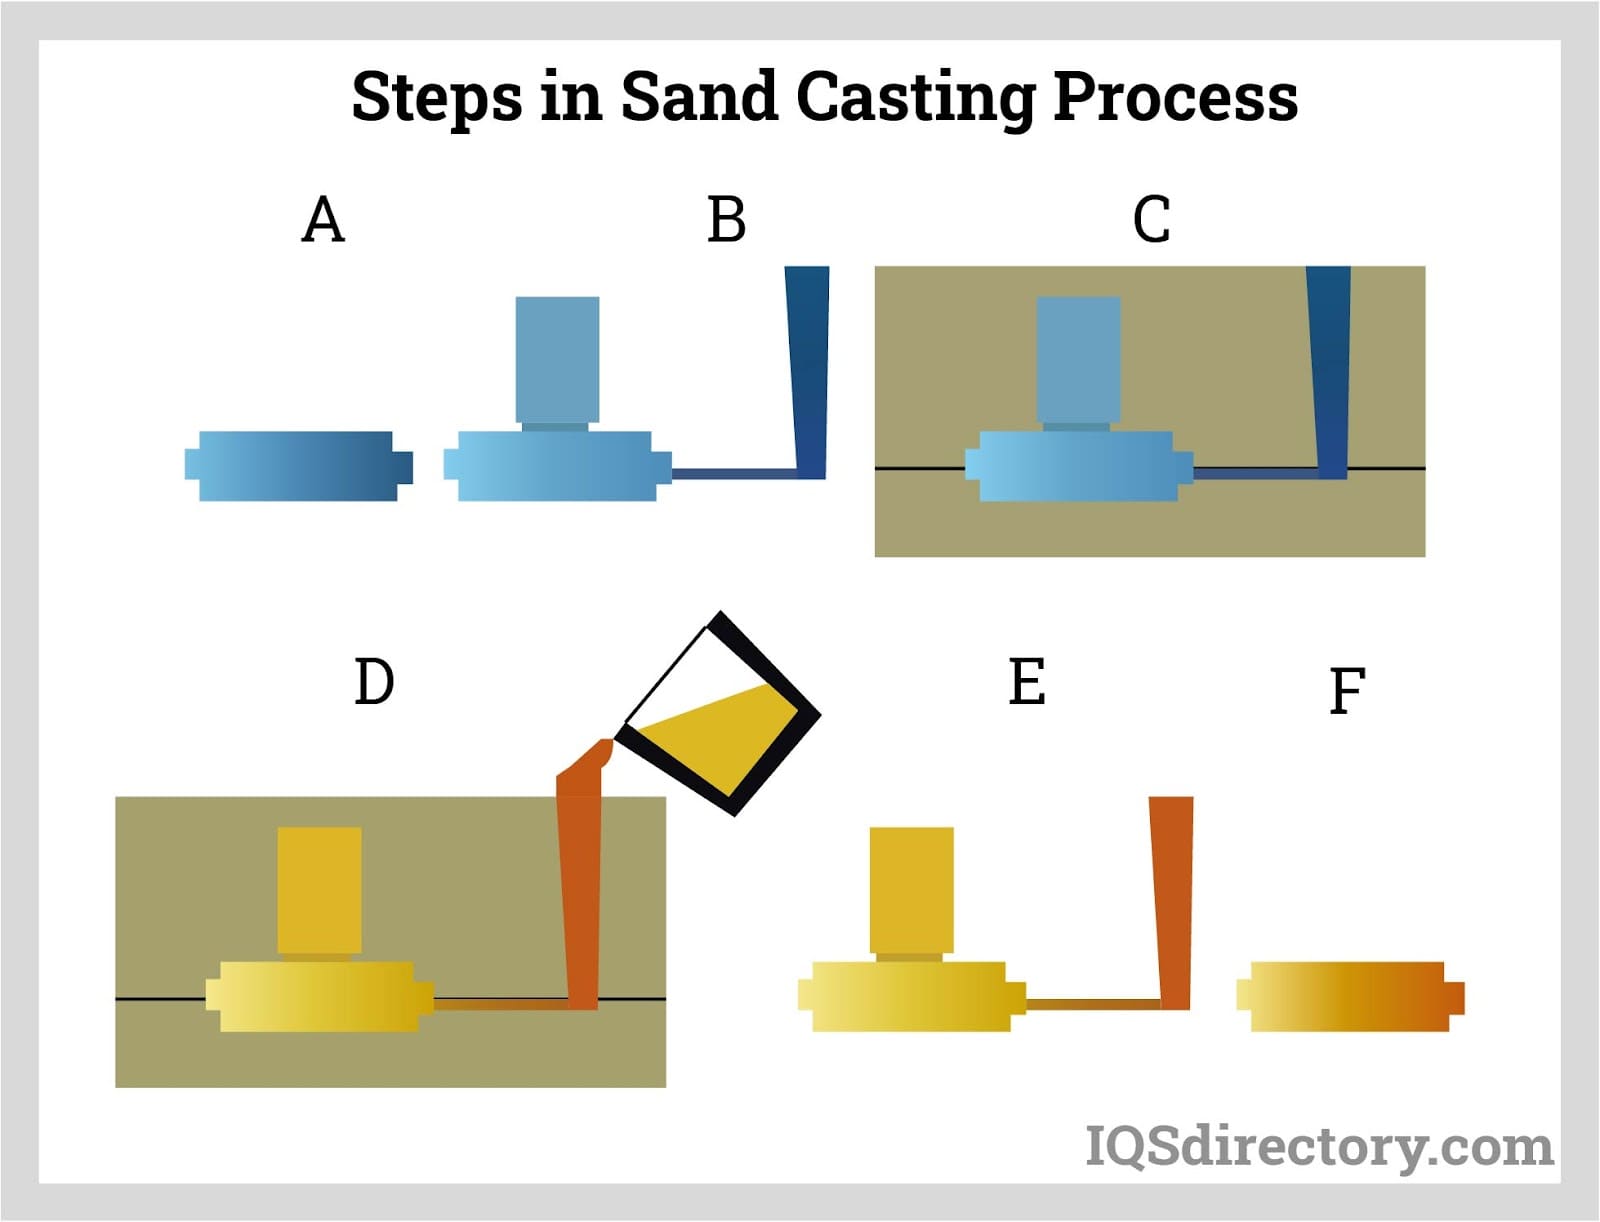 Steps in Sand Casting Process